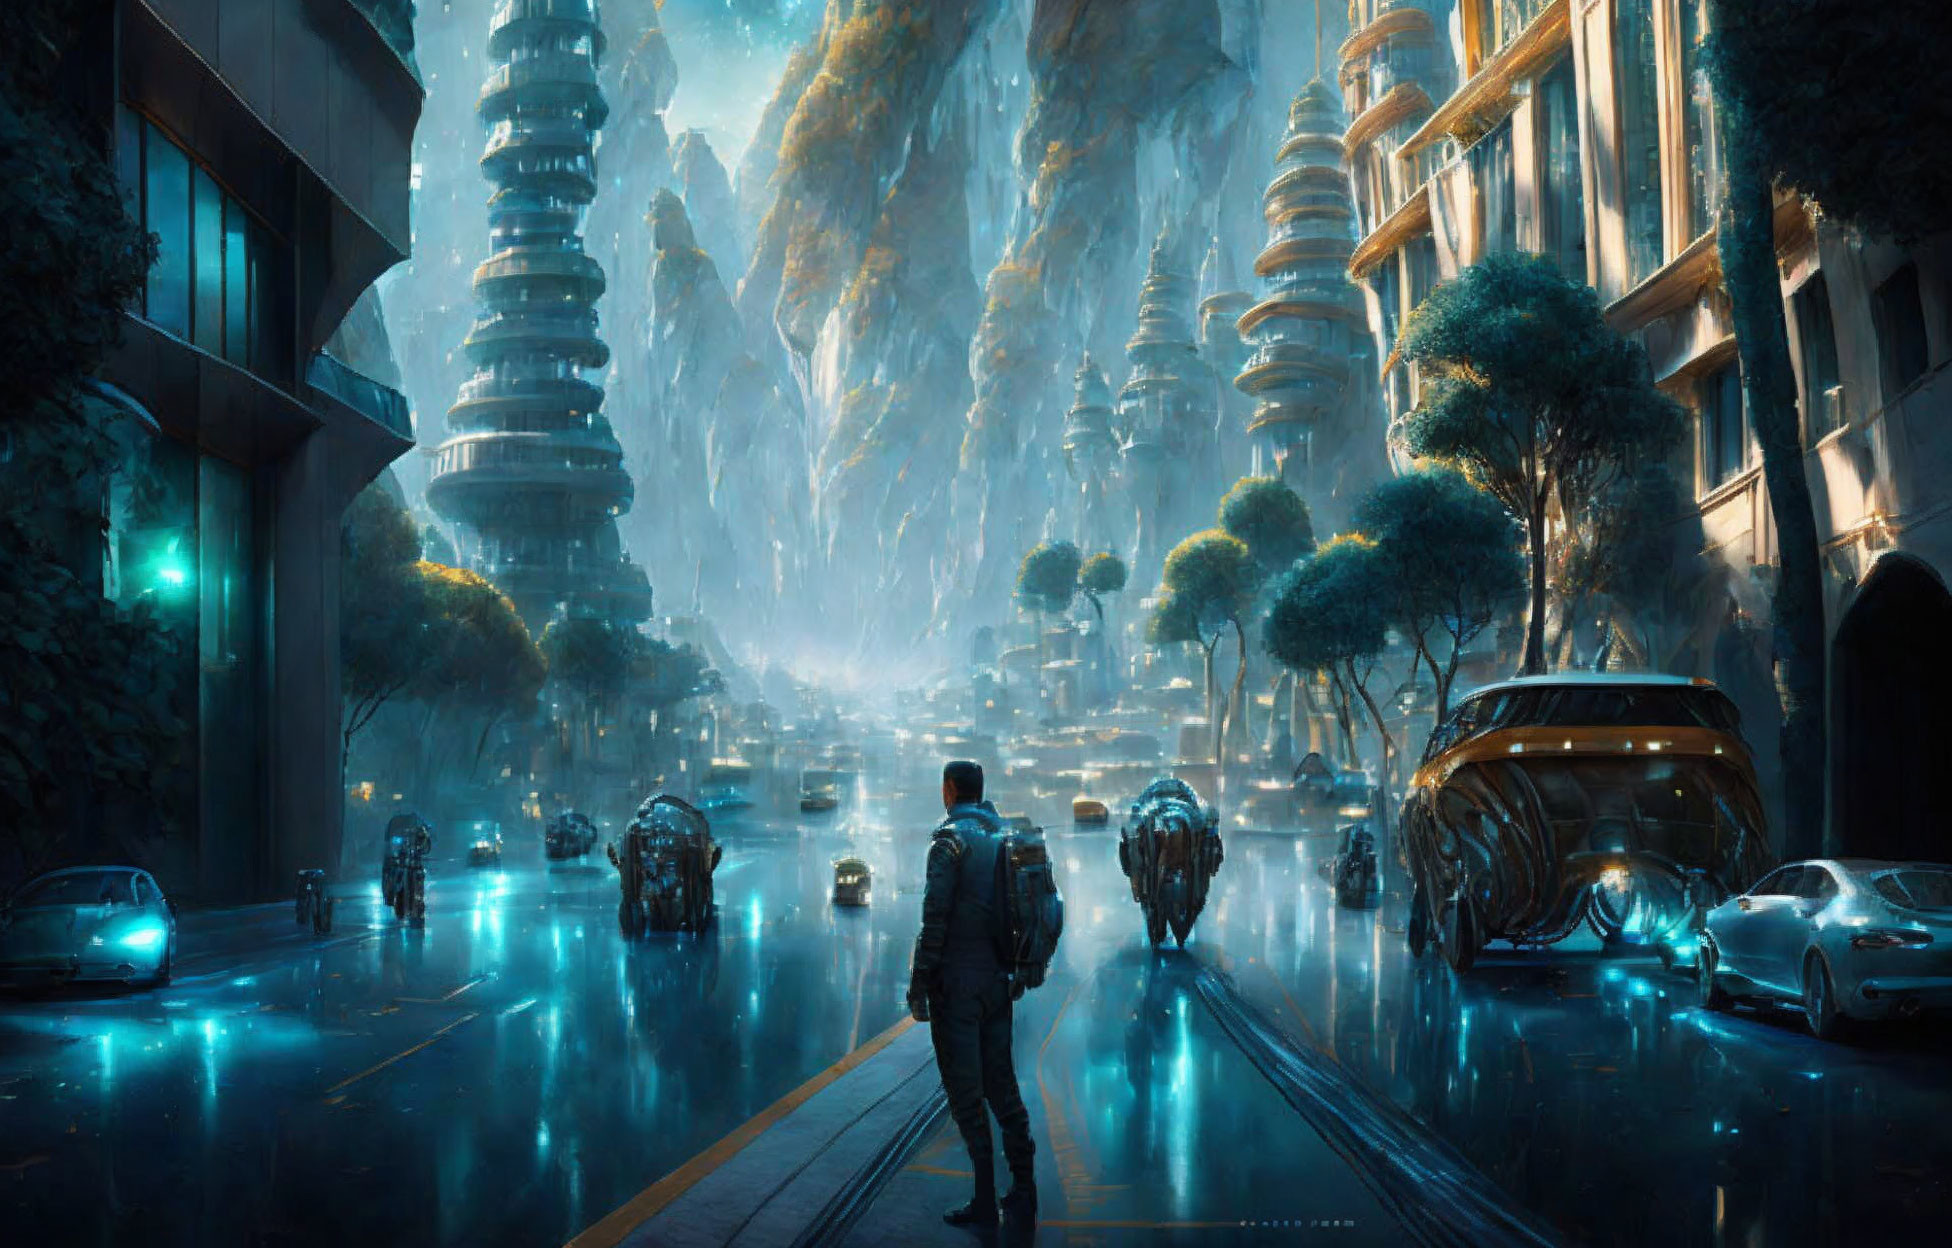 Futuristic city street with towering buildings and rock formations